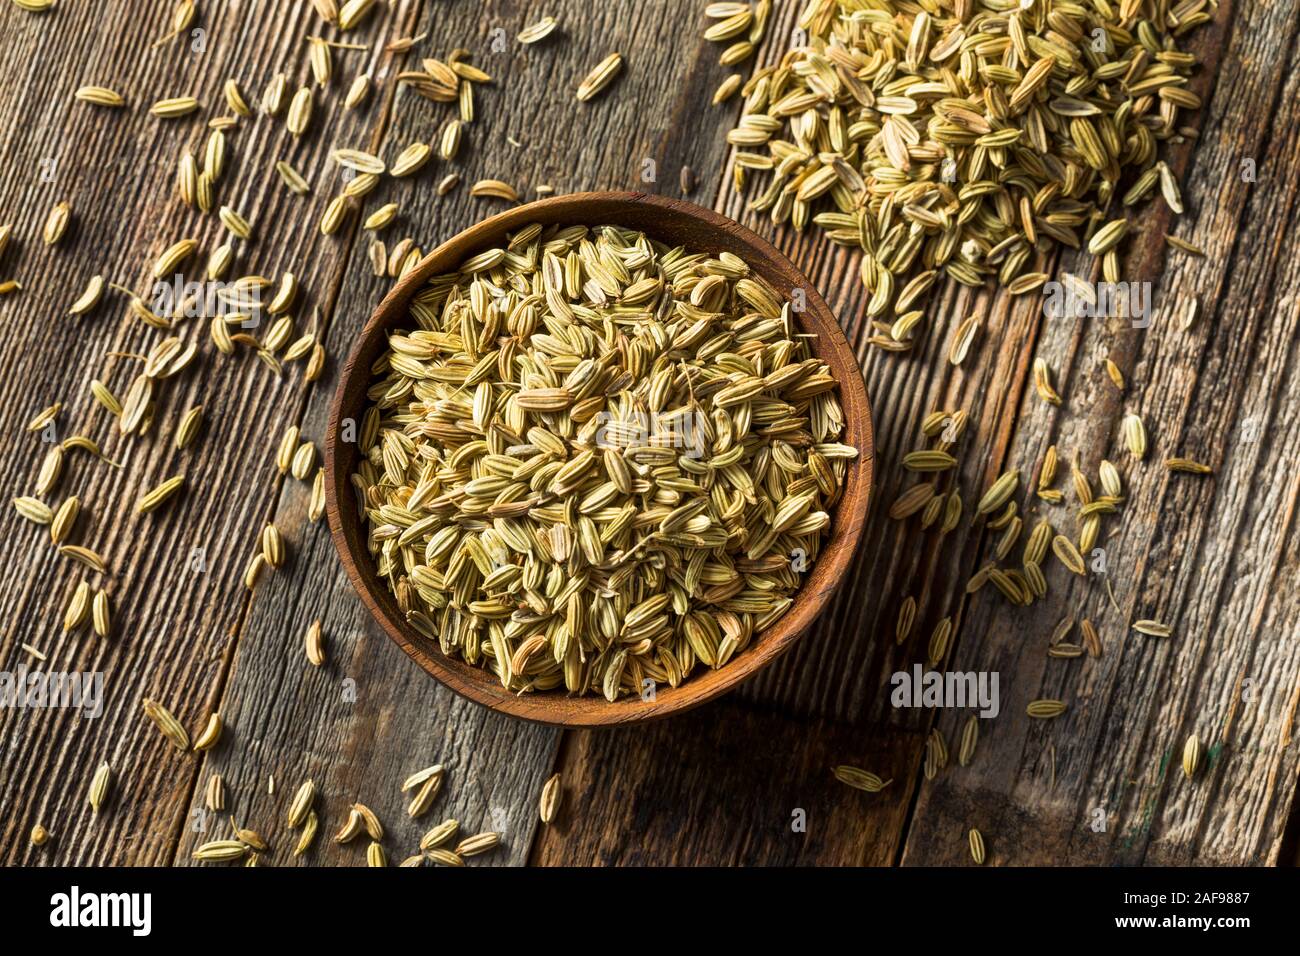 Raw Dry Organic Fennel Seeds in a Bowl Stock Photo